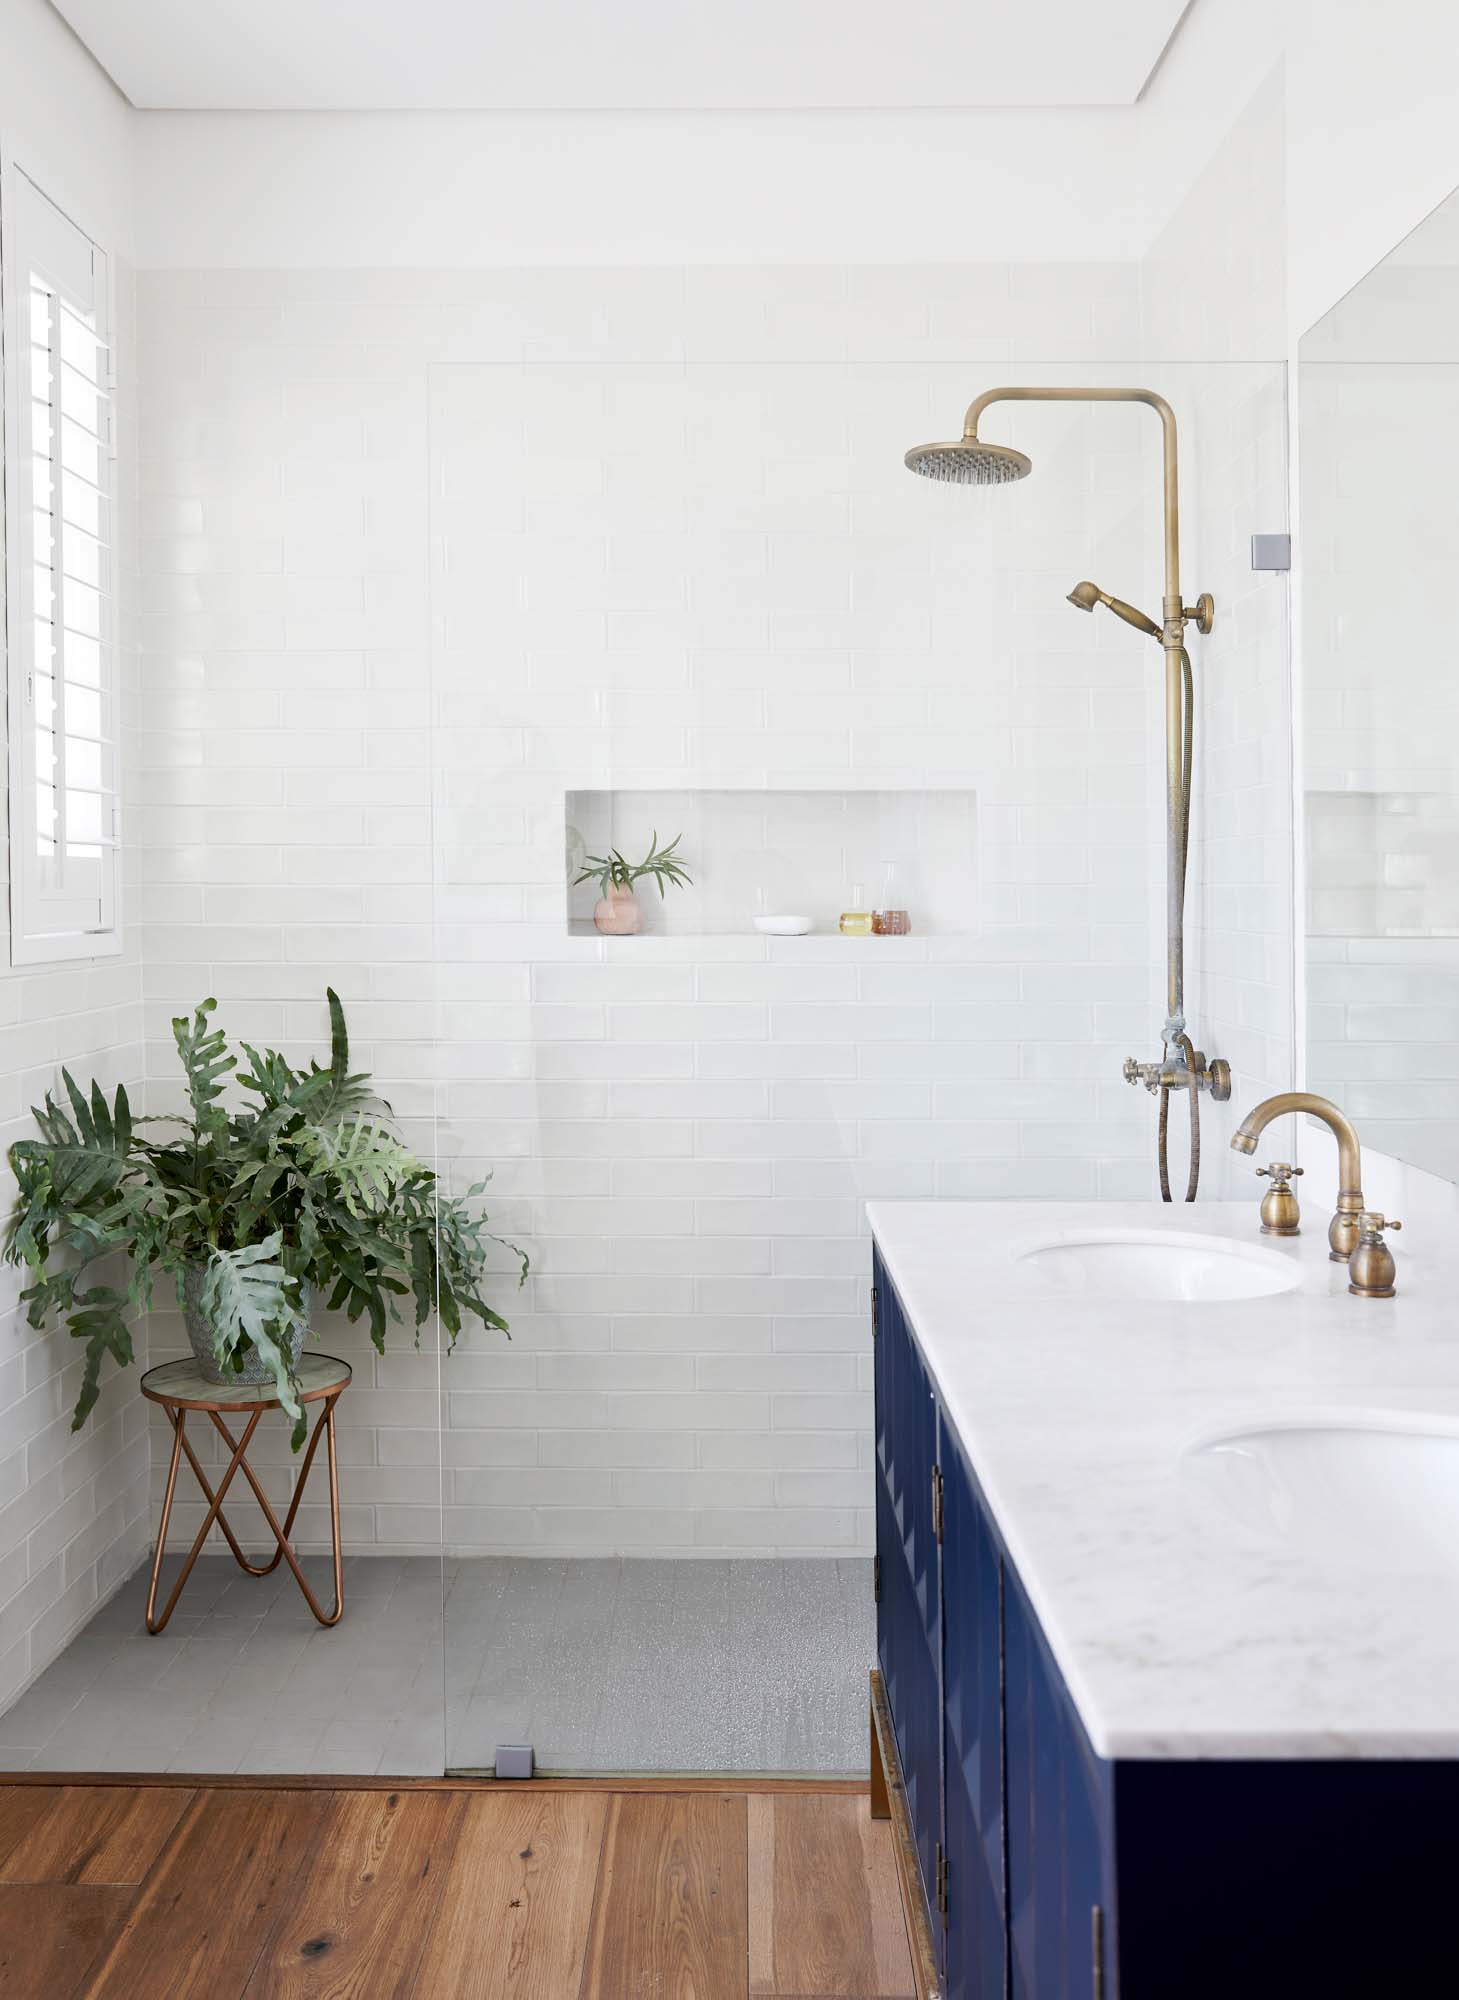 A large walk-in shower that is tiled with white, textured tiles, a deep navy vanity is on the right with white stone benchtop